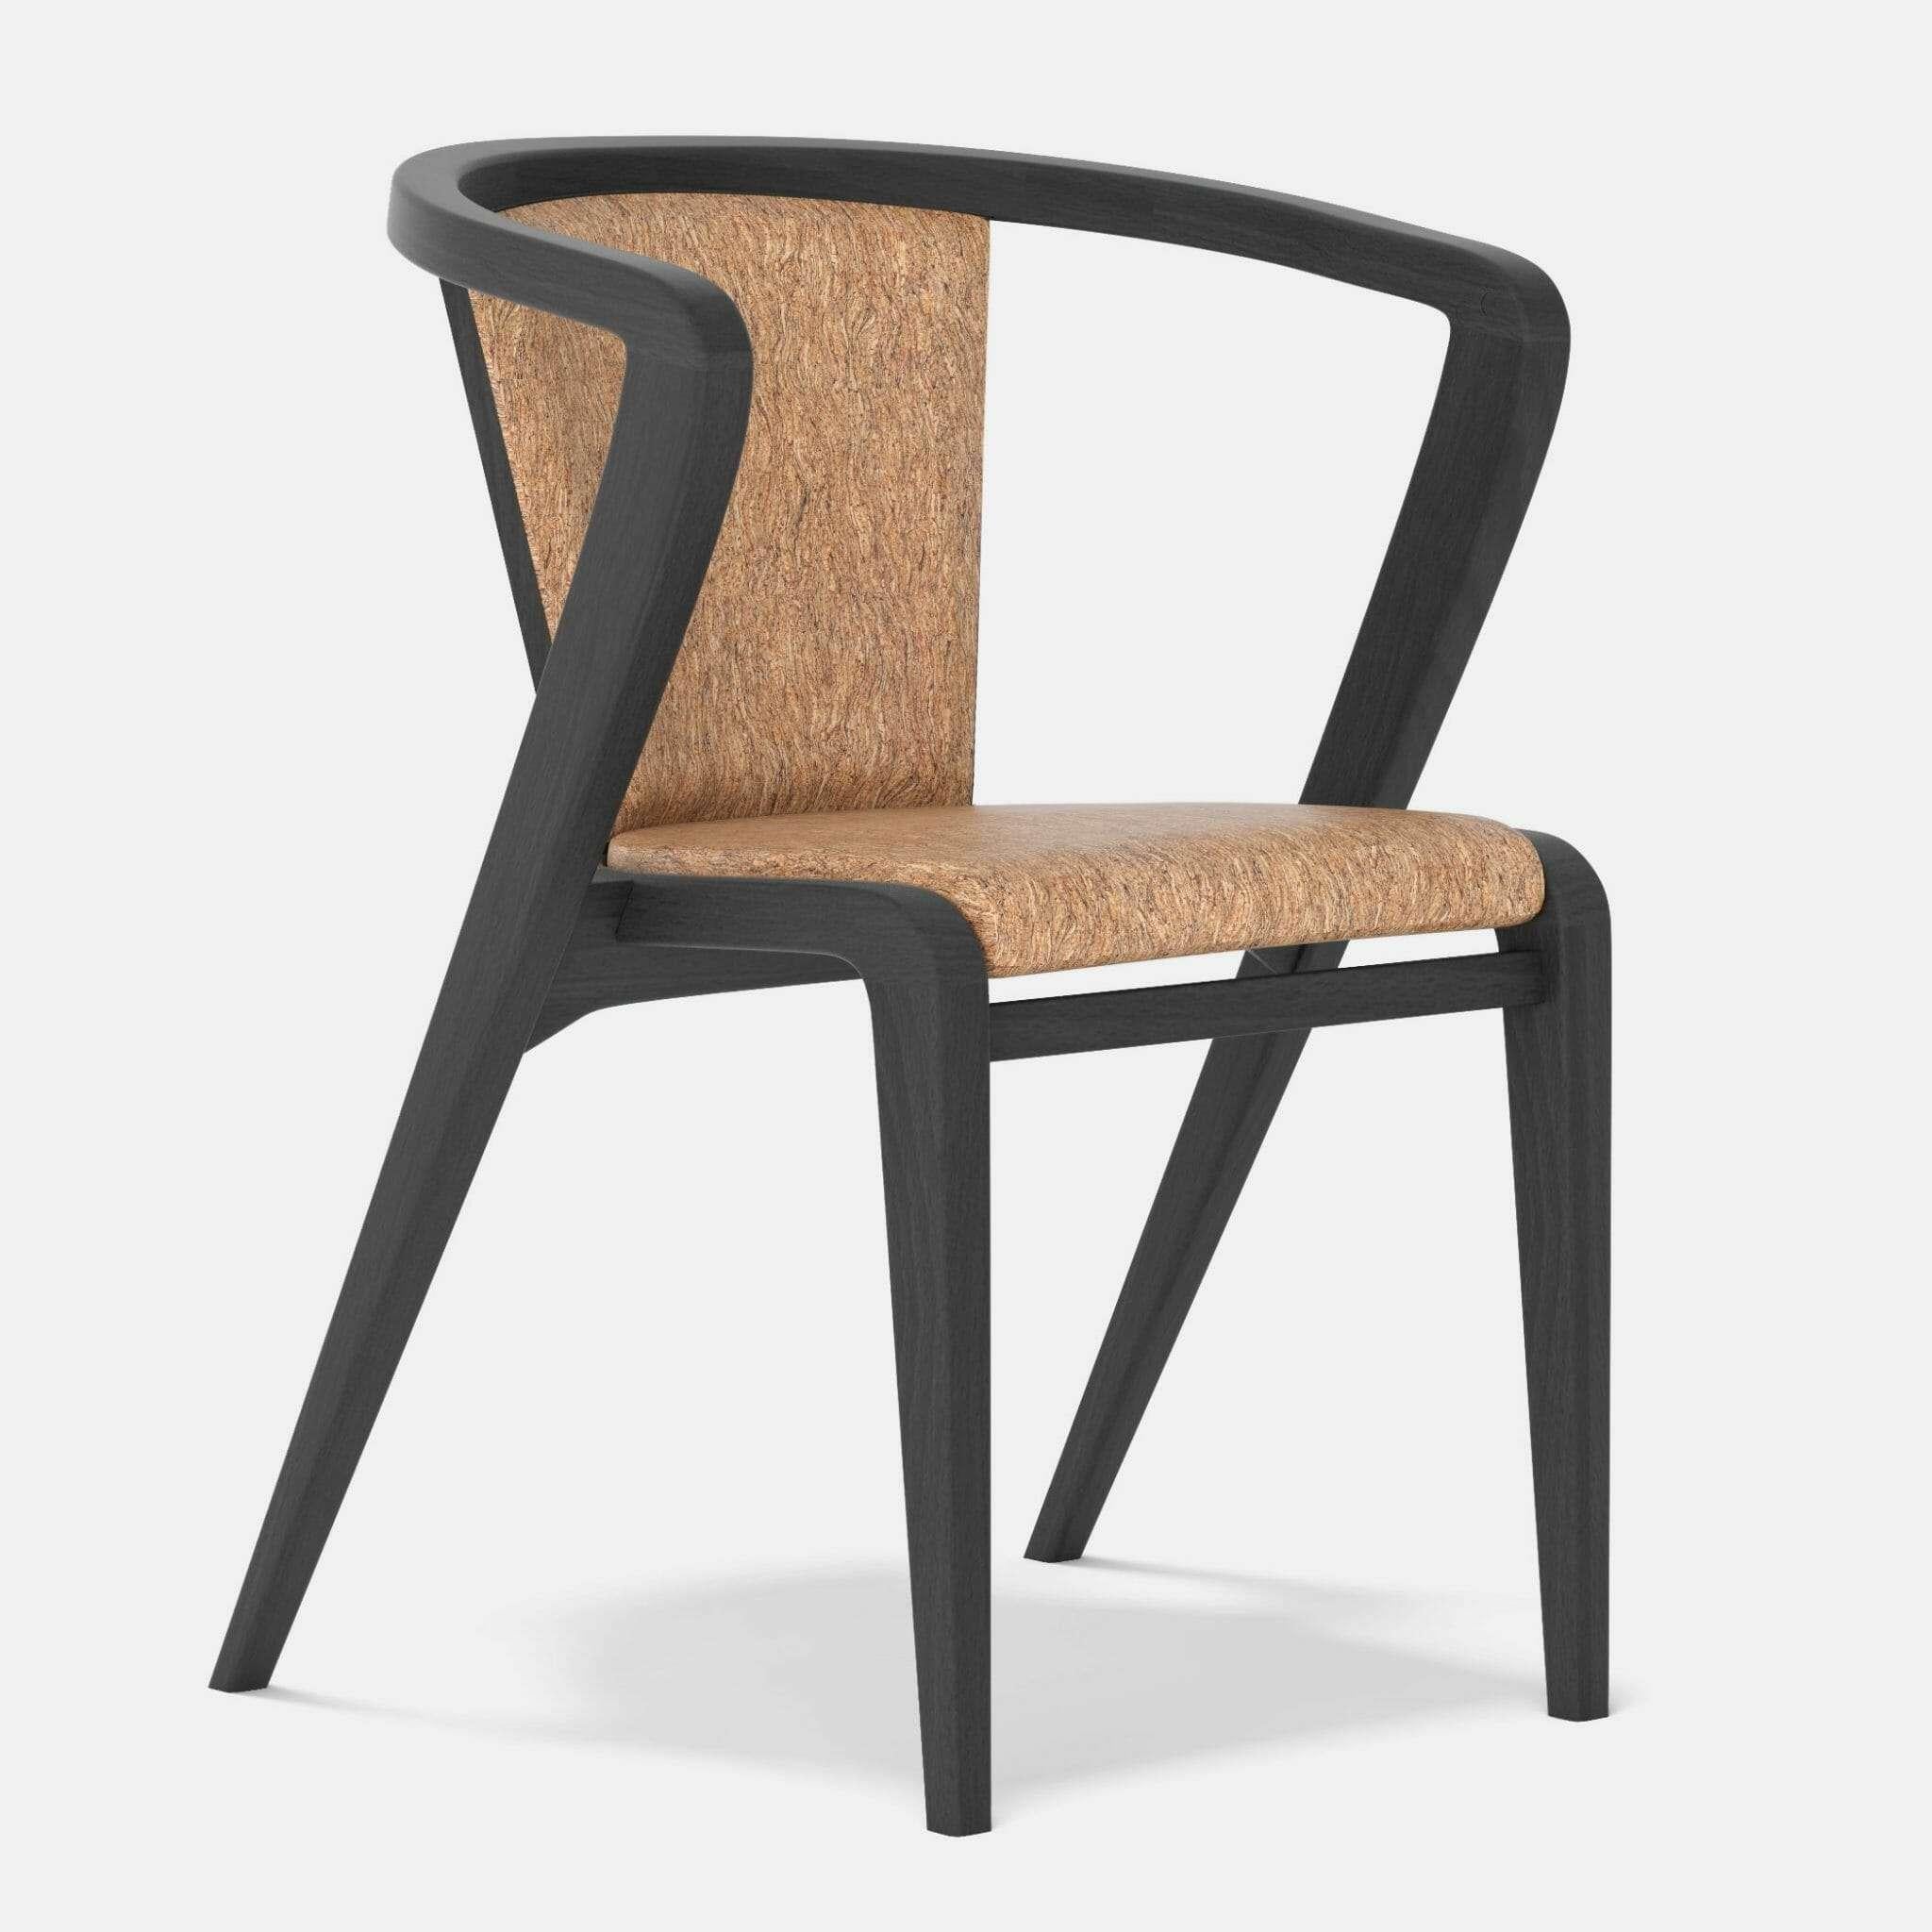 Ash and fabric Portuguese roots chair by Alexandre Caldas
Dimensions: W 40 x D 39 x H 73 cm
Materials: Solid ashwood, fabric

Seat and back available in fabric, velvet, natural leather.

Portuguese roots chair, was inspired by its original